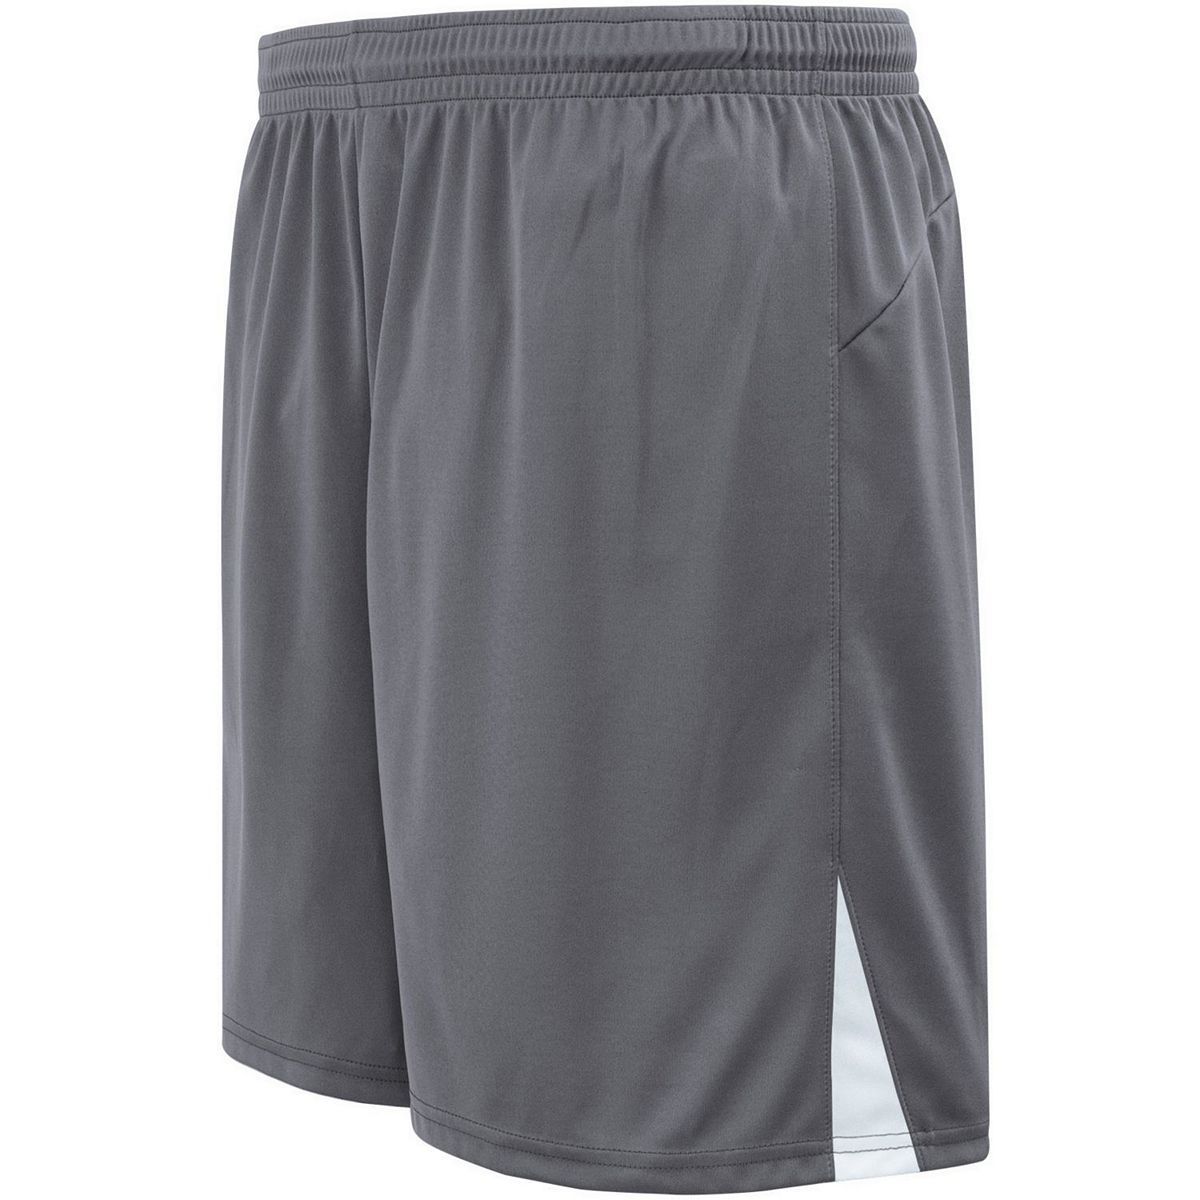 High 5 Ladies Hawk Shorts in Graphite/White  -Part of the Ladies, Ladies-Shorts, High5-Products, Soccer, All-Sports-1 product lines at KanaleyCreations.com